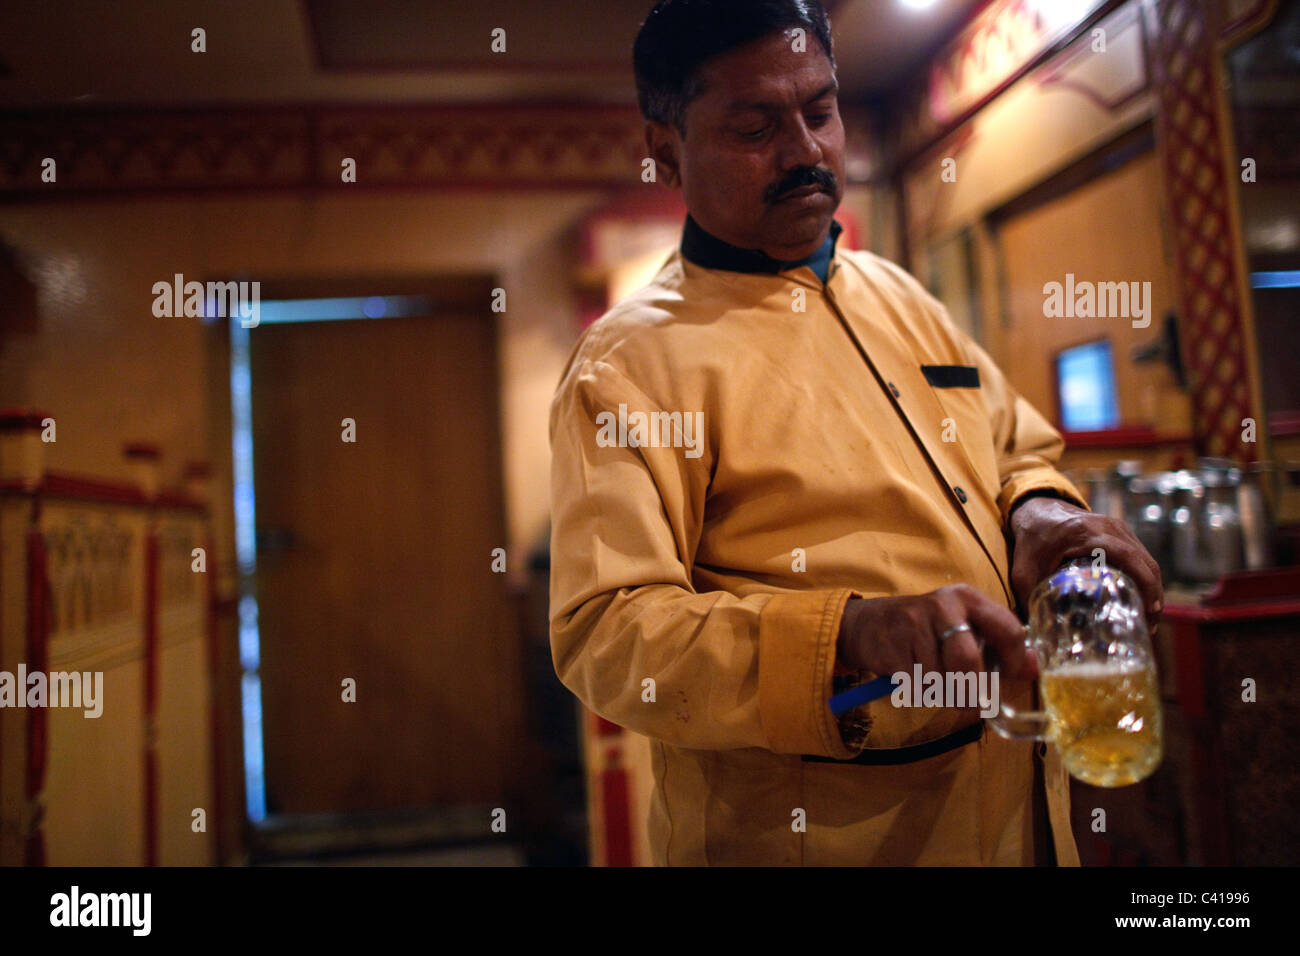 A waiter pours beer to a glass in a restaurant serving alcohol in Patna, Bihar, India. Stock Photo